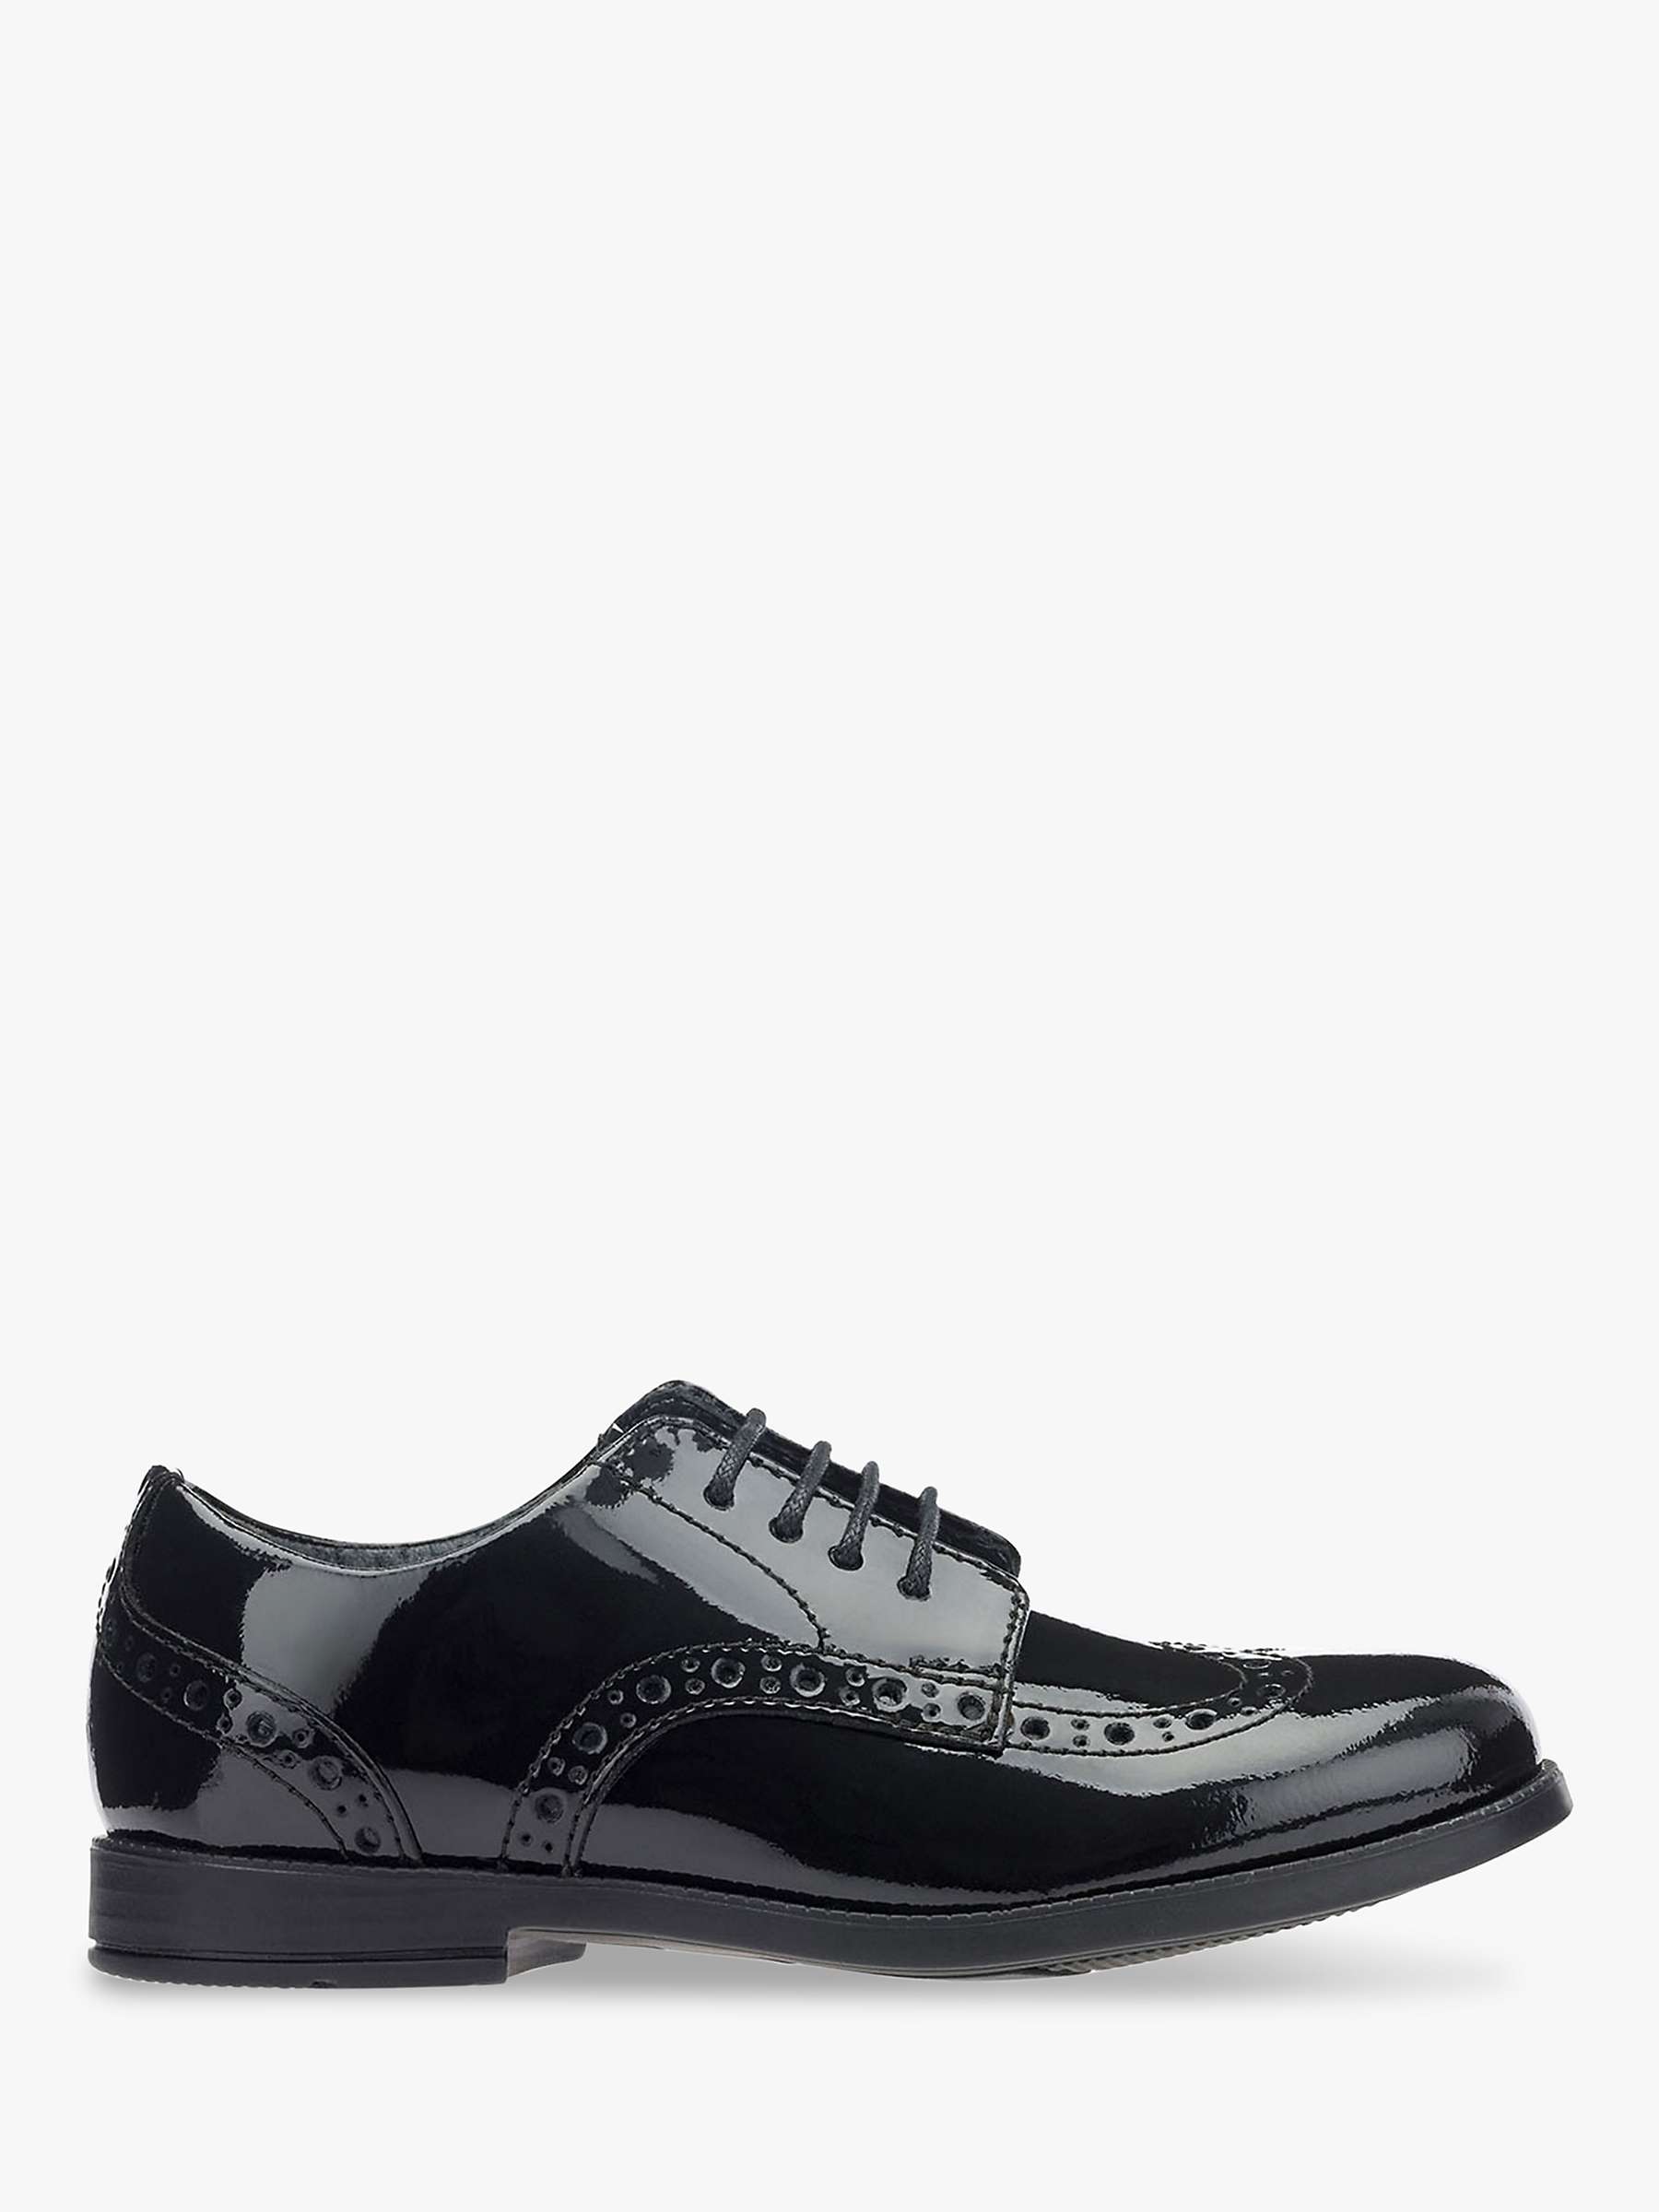 Buy Start-Rite Kids' Leather Brogue Shoes, Black Patent Online at johnlewis.com